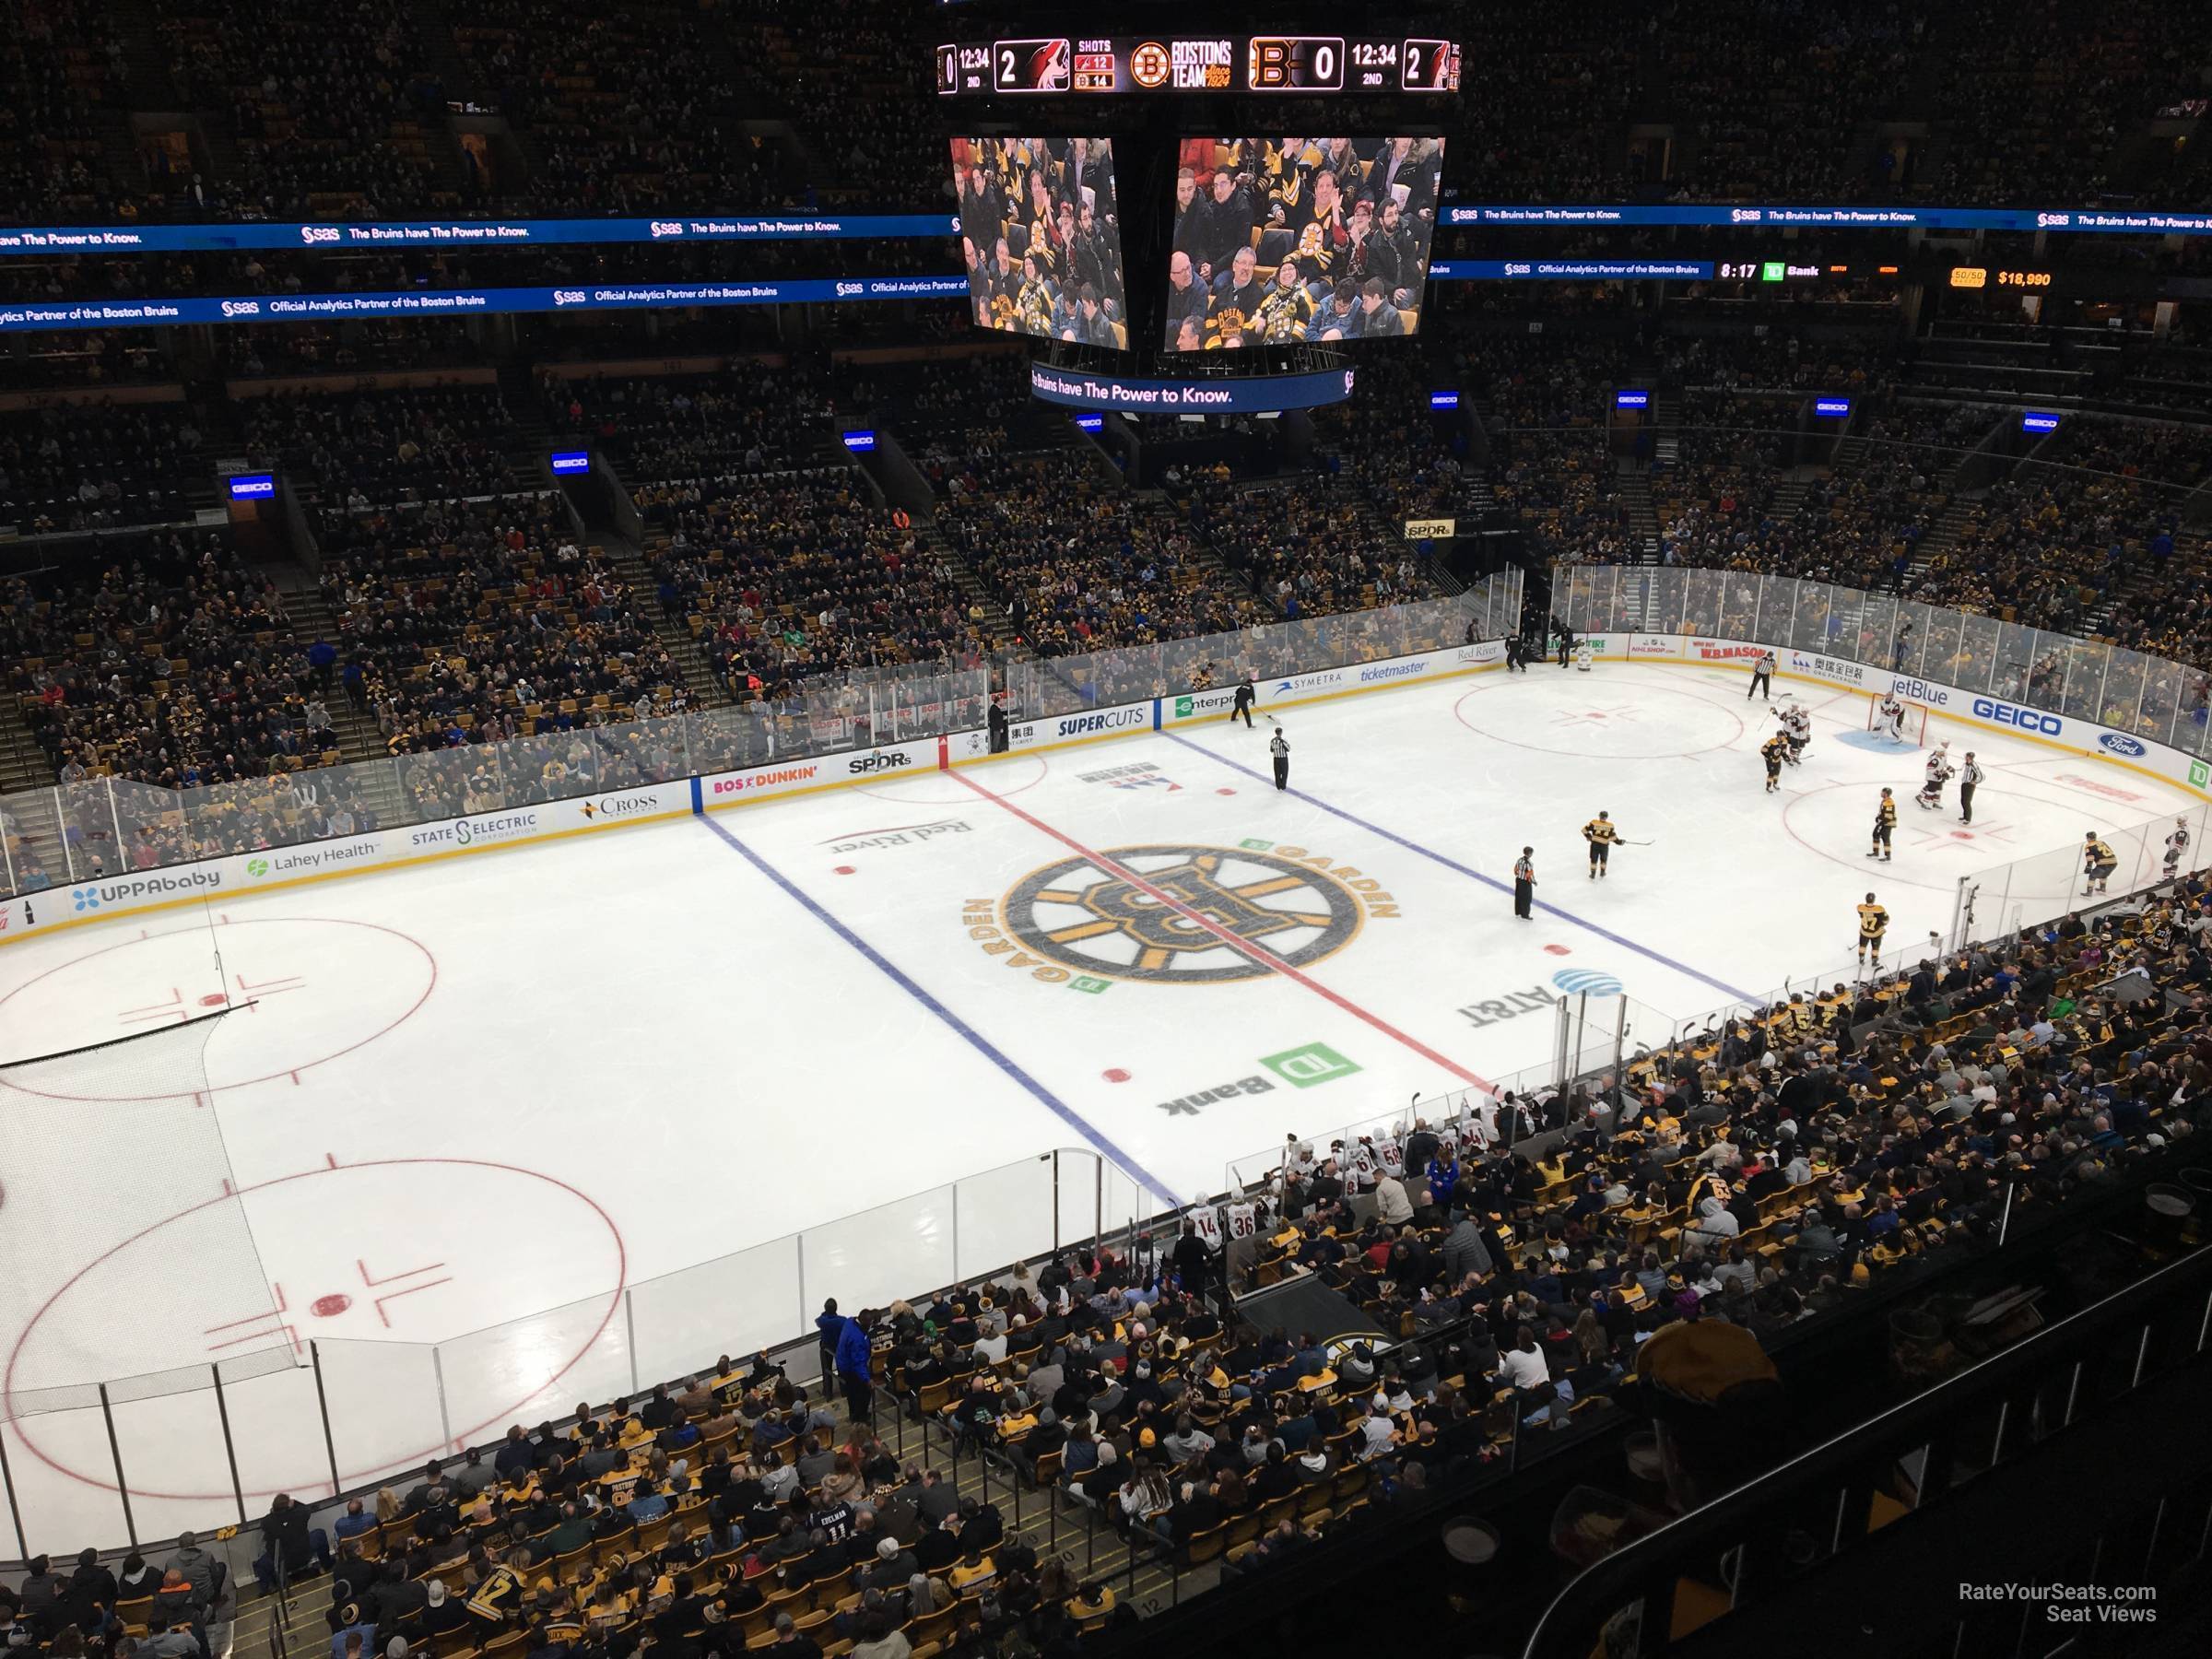 section 303, row 3 seat view  for hockey - td garden